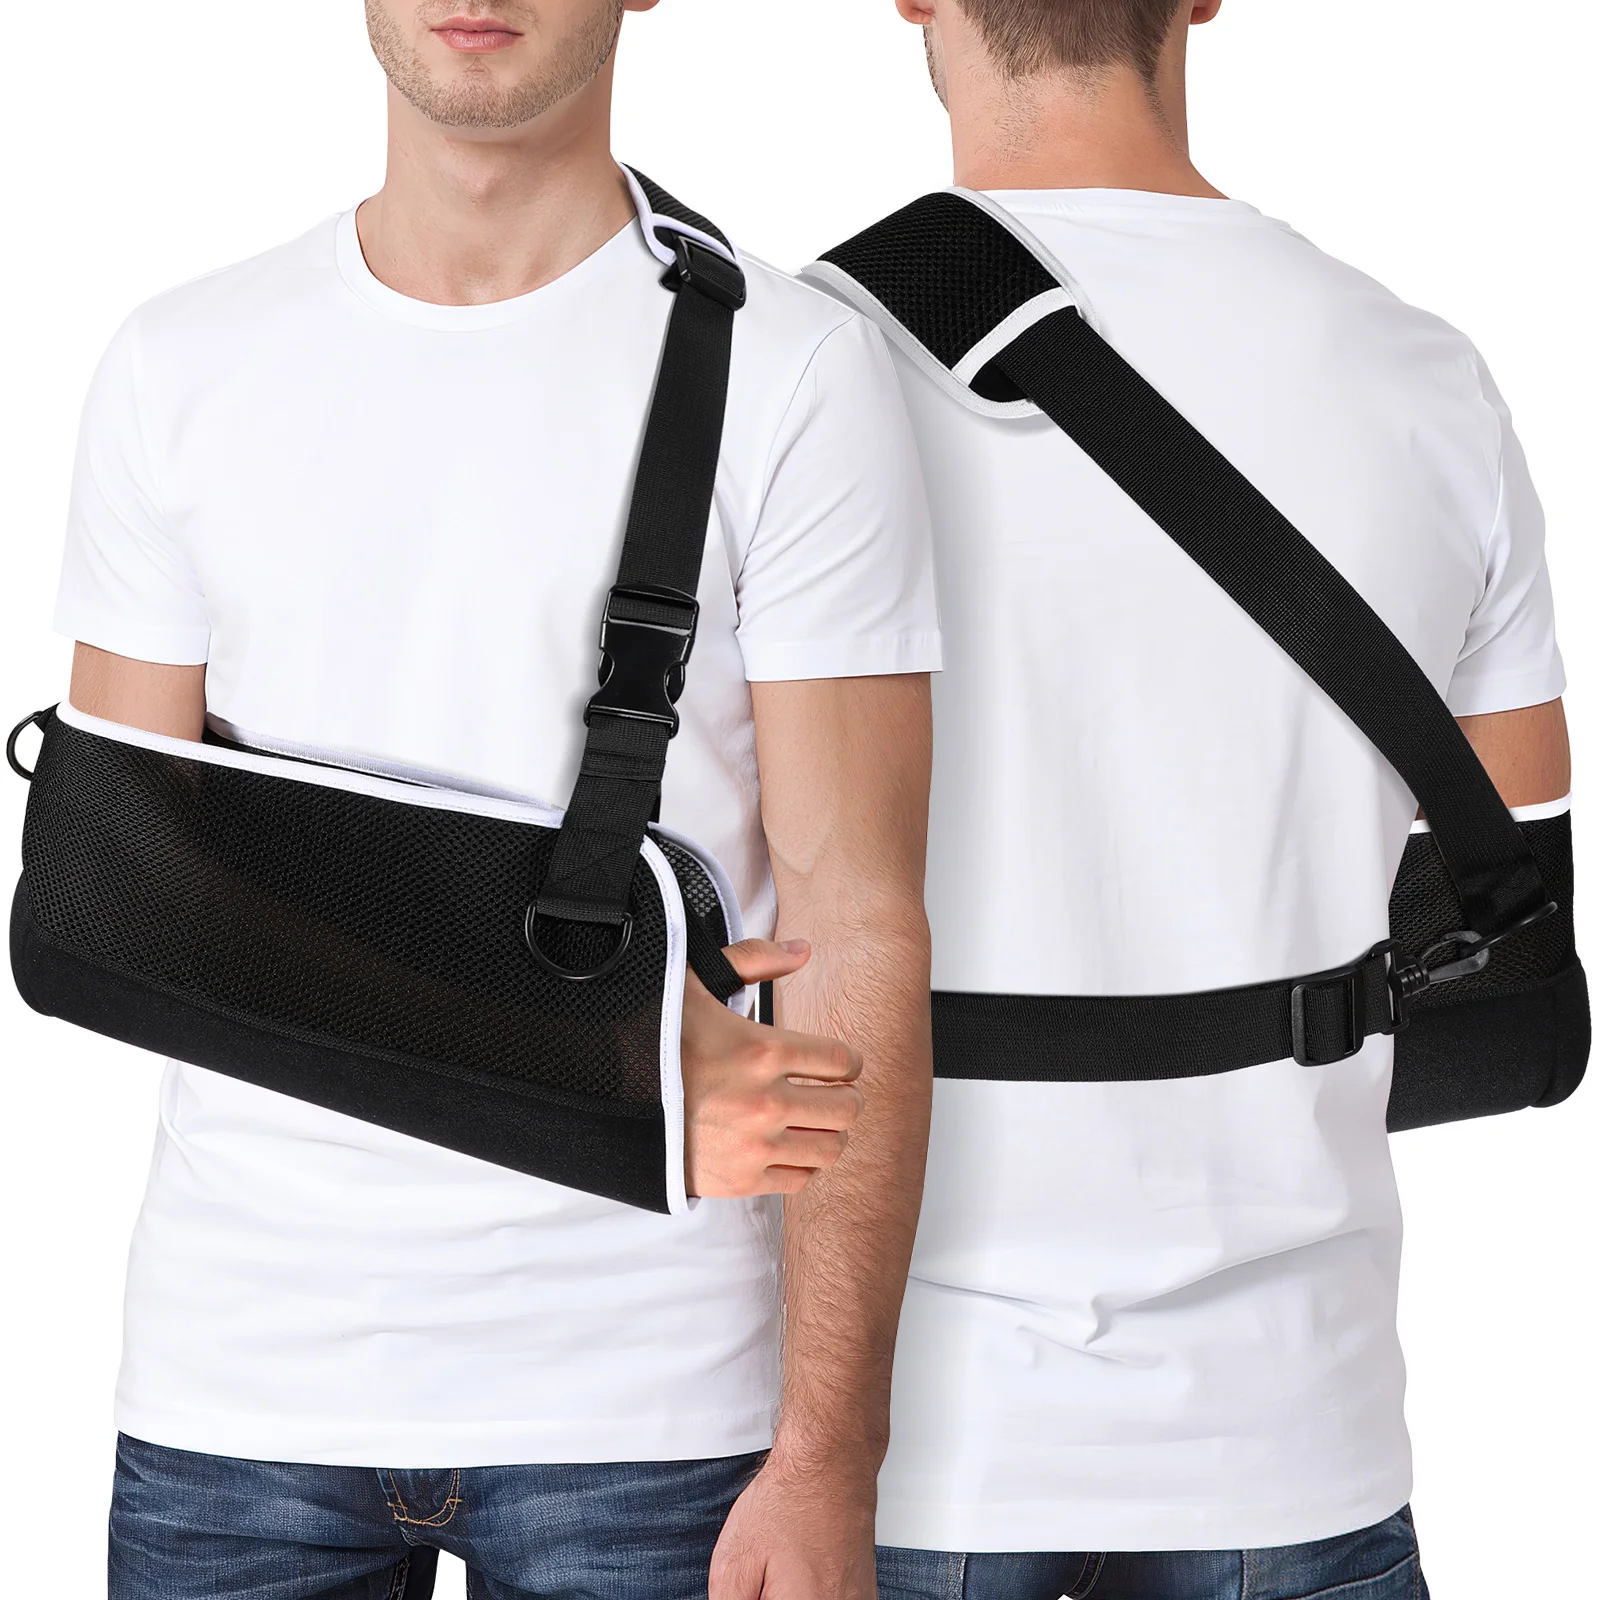 

Fracture Sling Lifting Strap Arm Support Suspenders Arm Sling Women Mesh Left Arm Sling Arm Sling Elbow Injury Man